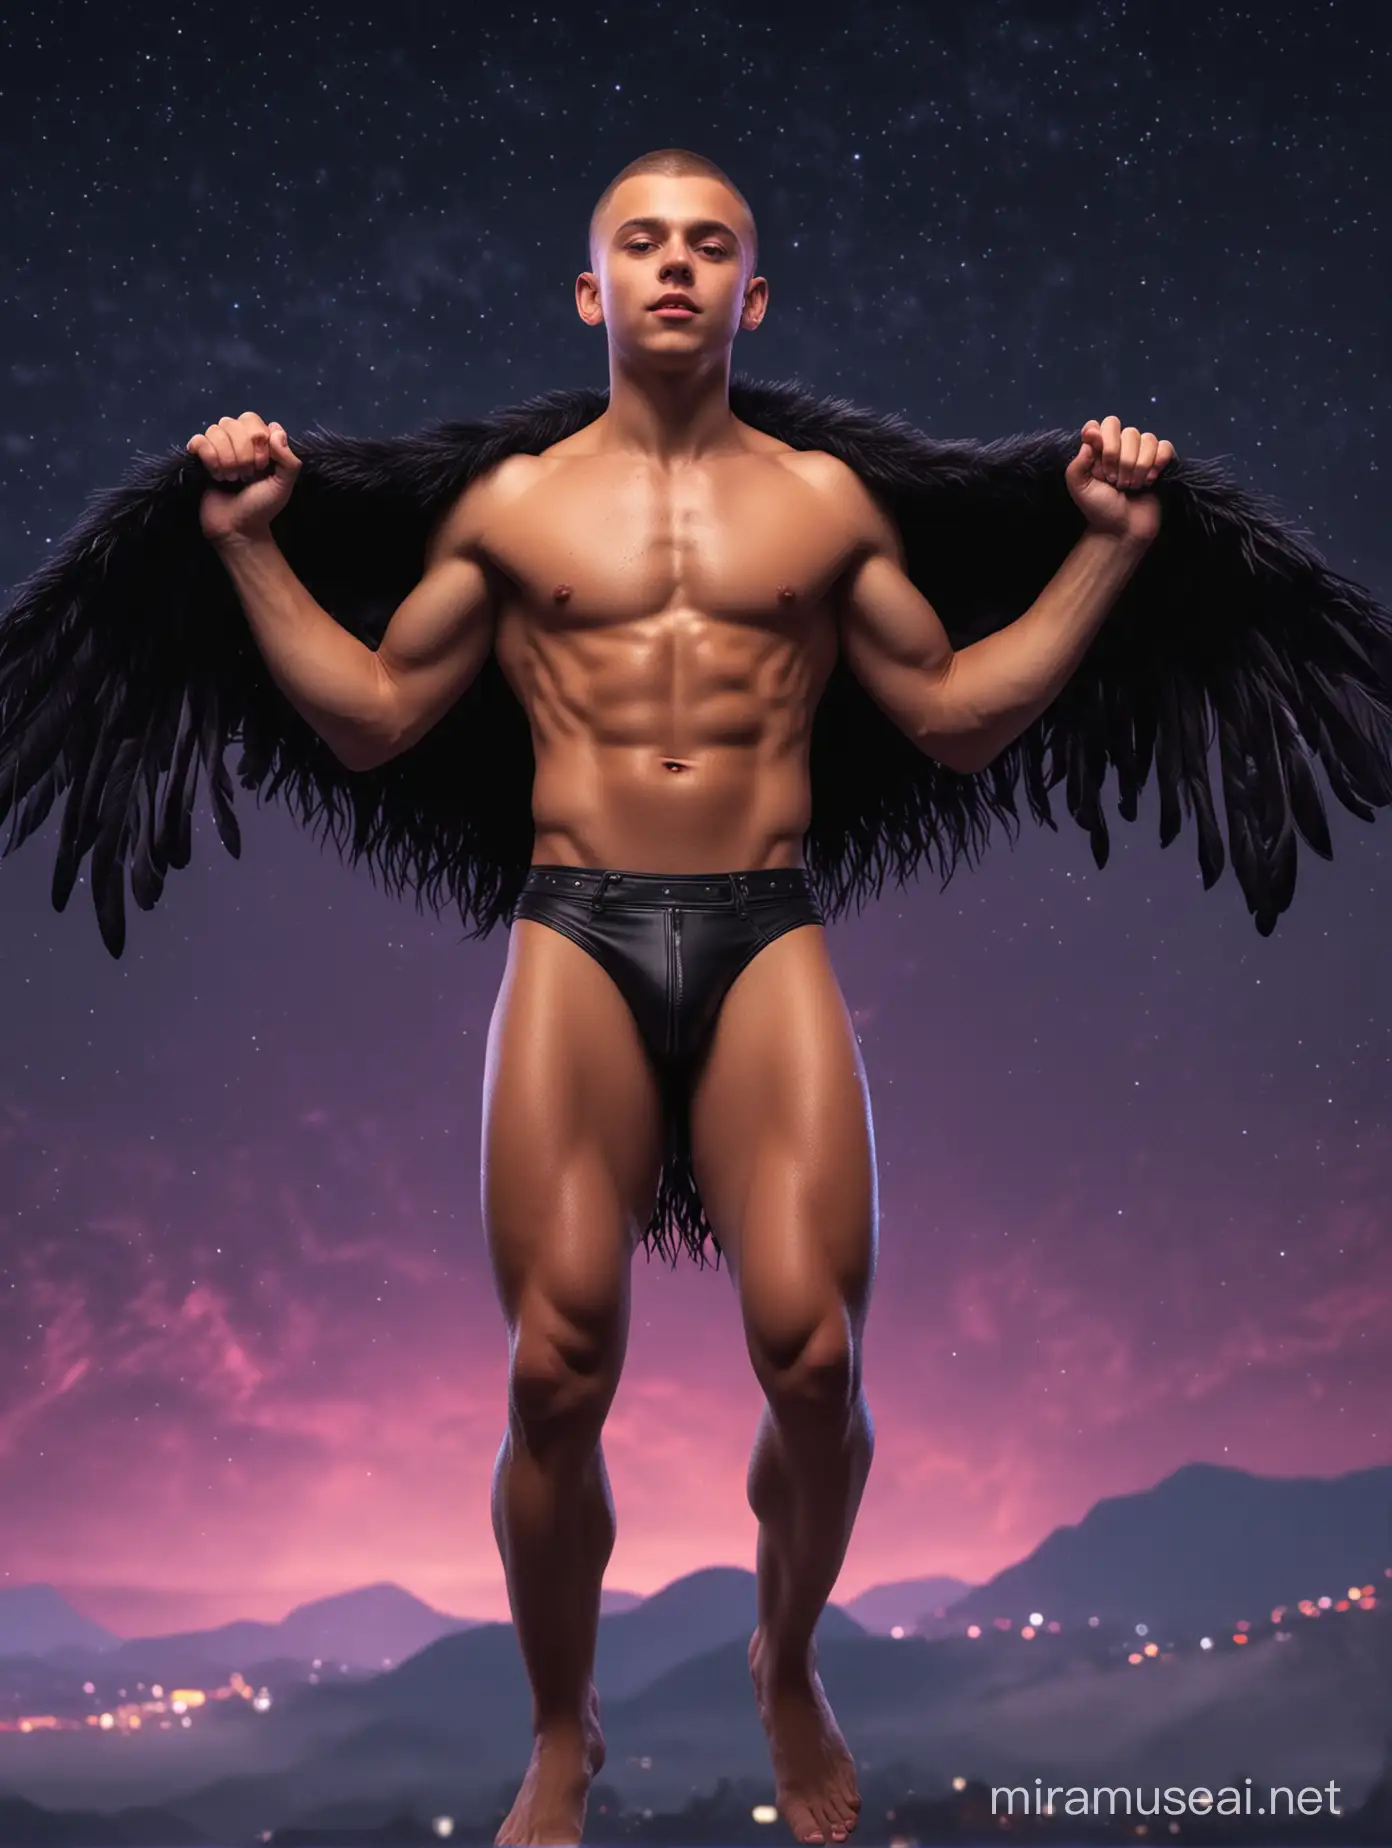 Realistic muscular sweaty shirtless young boy shaved hair, wearing black fur loincloth, holding a friend in his arms, and flying in the sky at night with neon colors ambient.